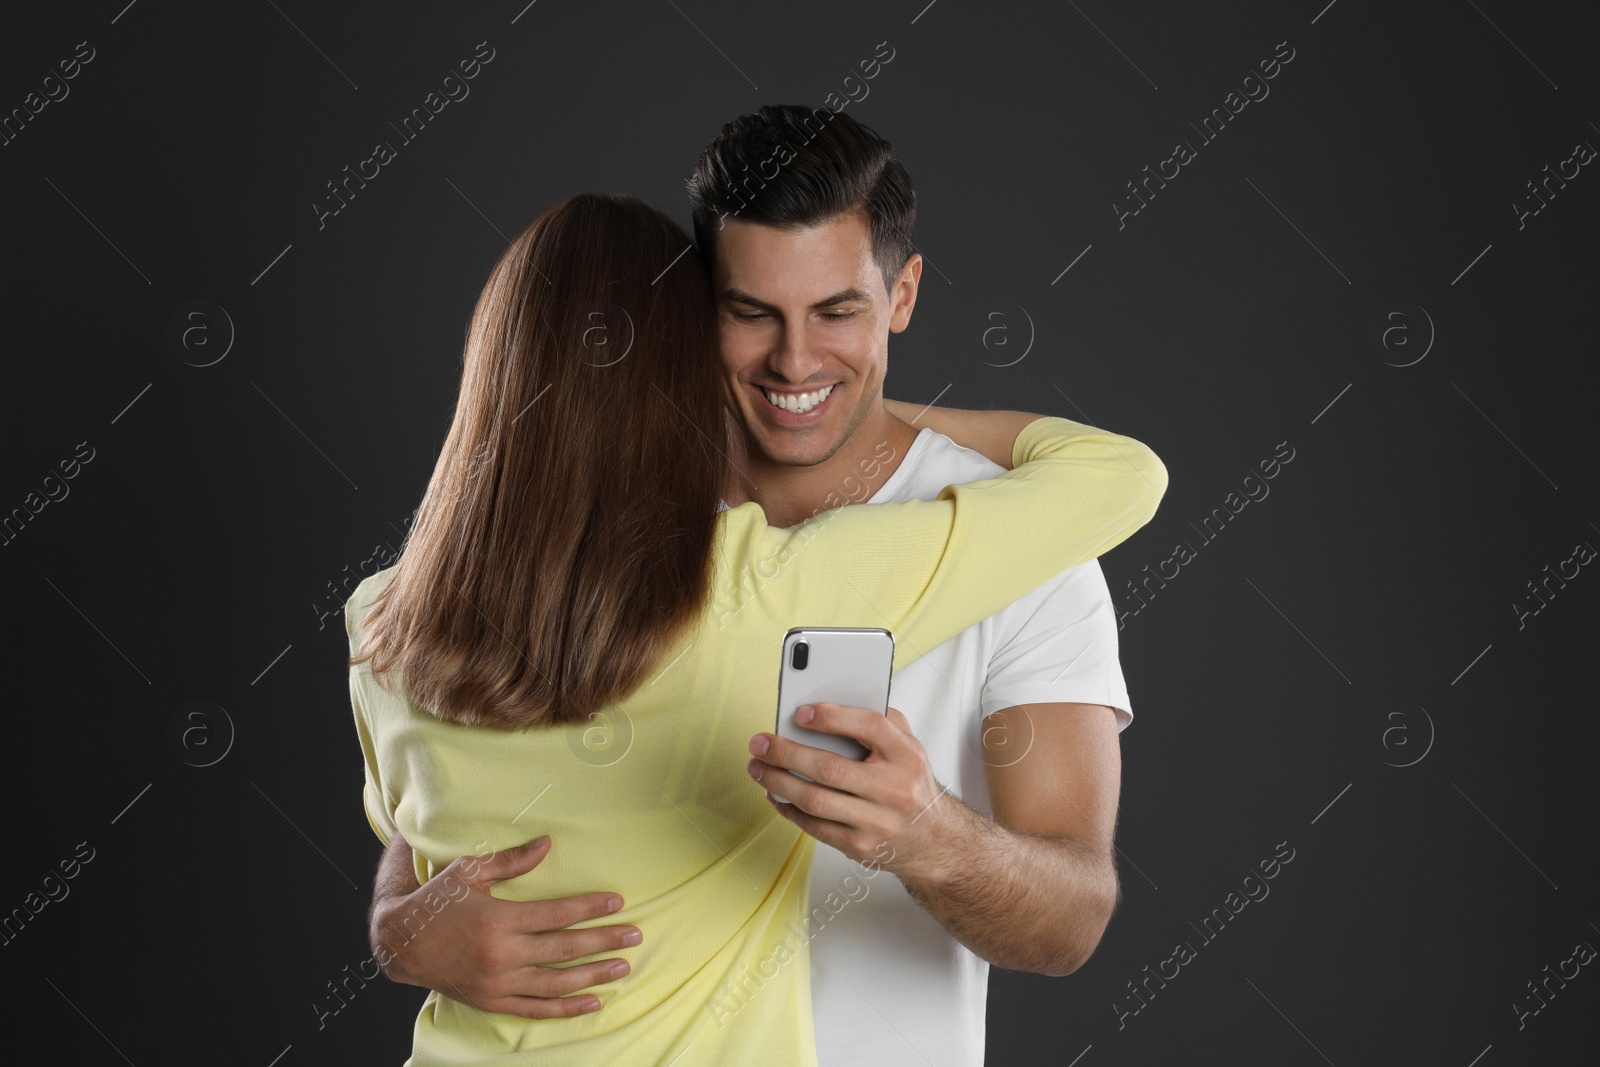 Photo of Man interested in smartphone while hugging his girlfriend on black background. Relationship problems